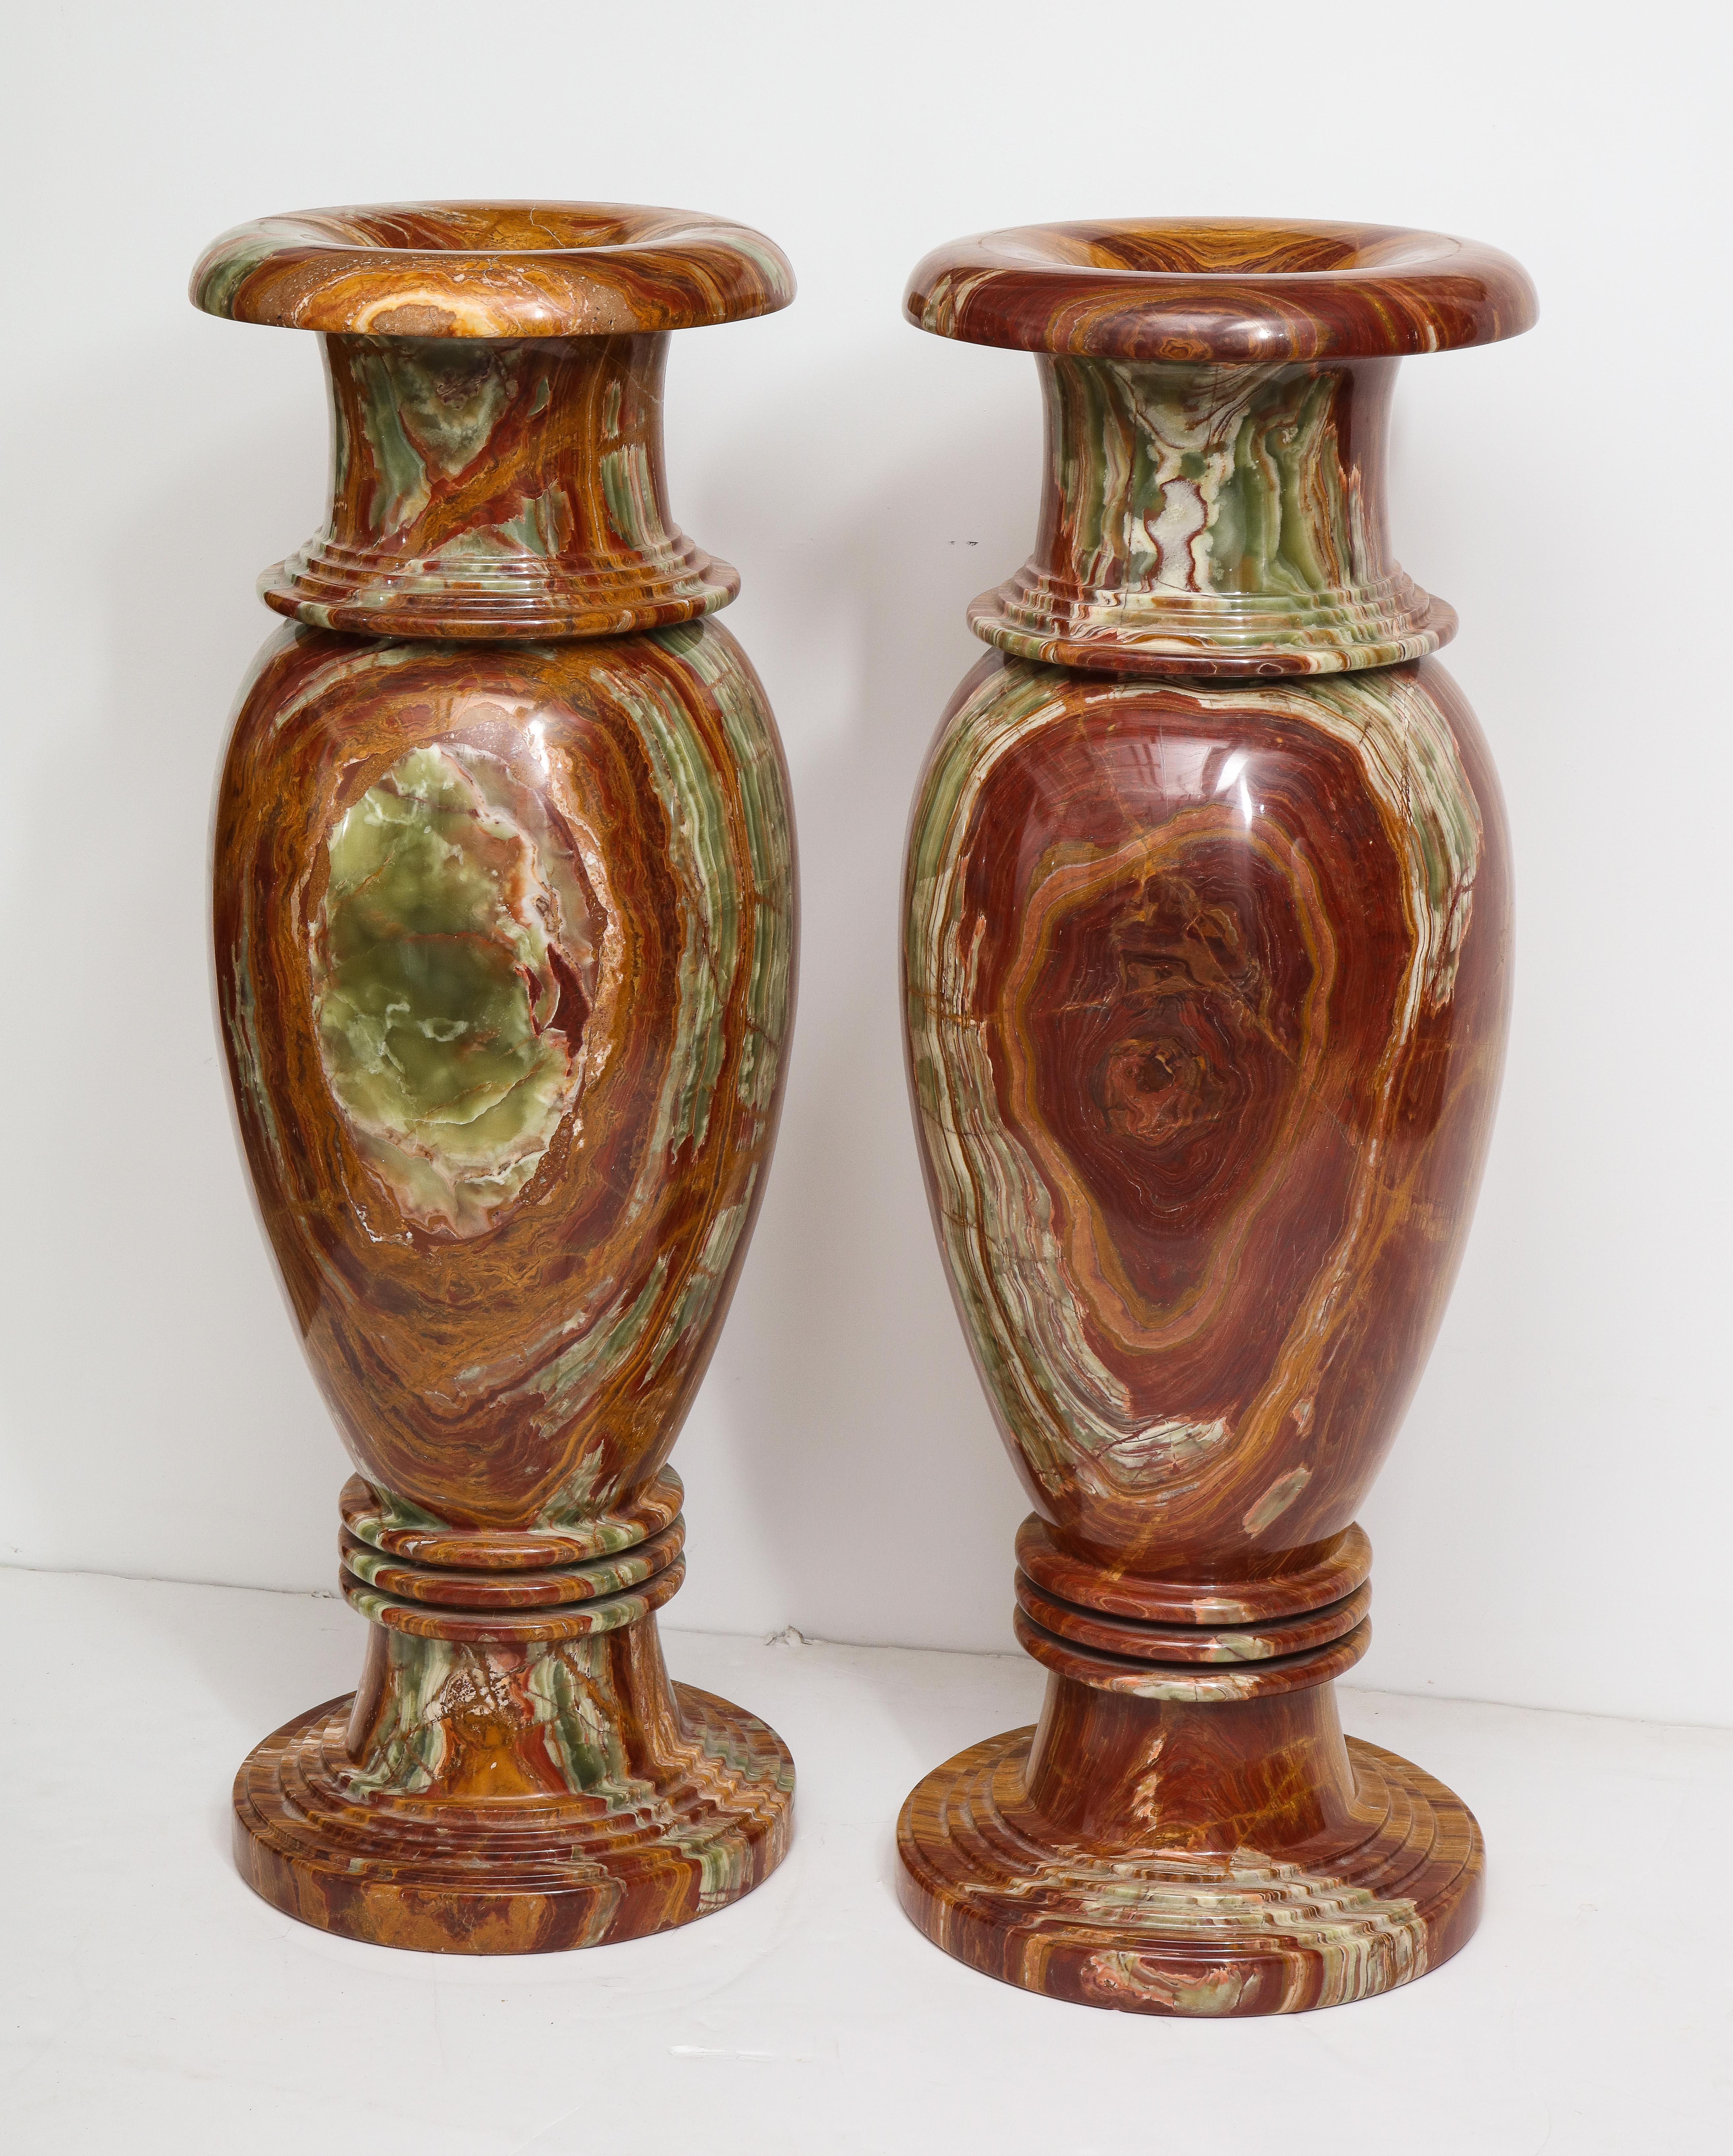 Neoclassical Pair of Monumental Onyx Urns